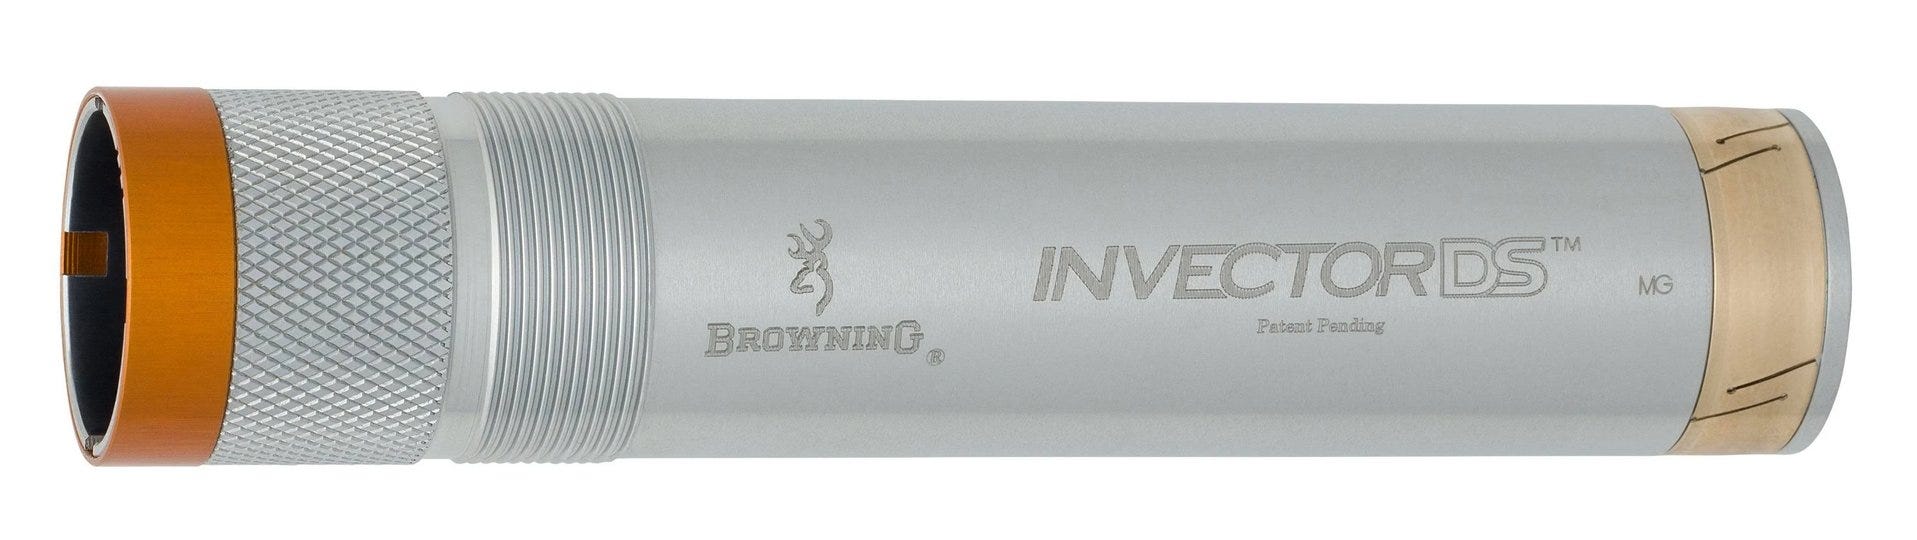 browning-invector-ds-choke12modext-1